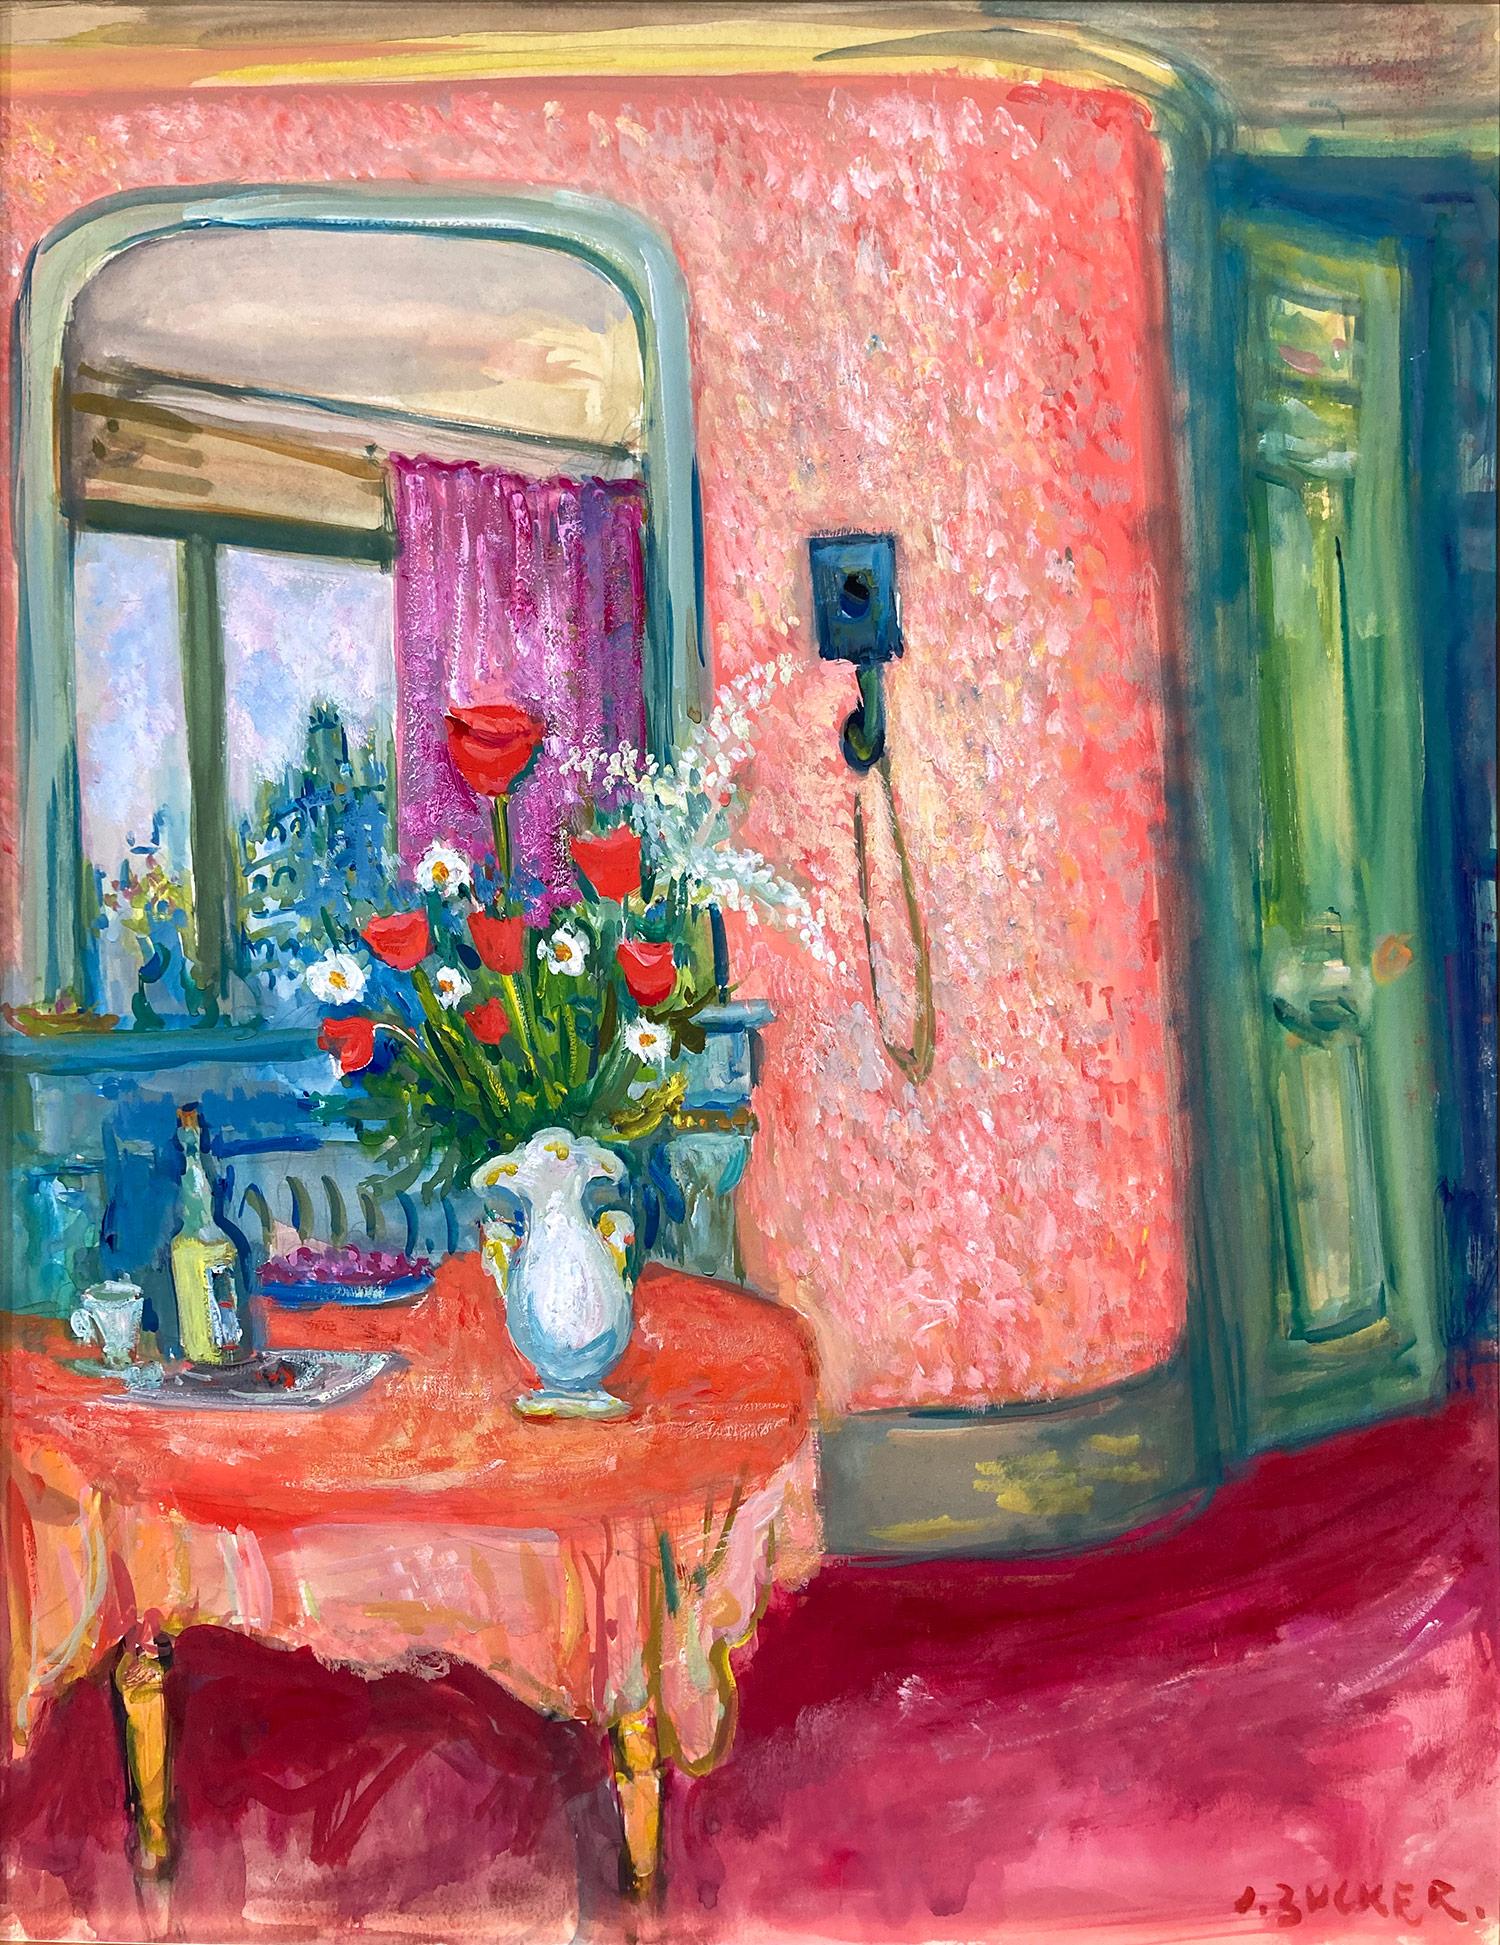 This painting depicts an interior scene done in Paris. The fun details are what make this painting so attractive and desirable; there is a wine bottle and flowers on top of the table and you can feel that someone was just in the room. The telephone